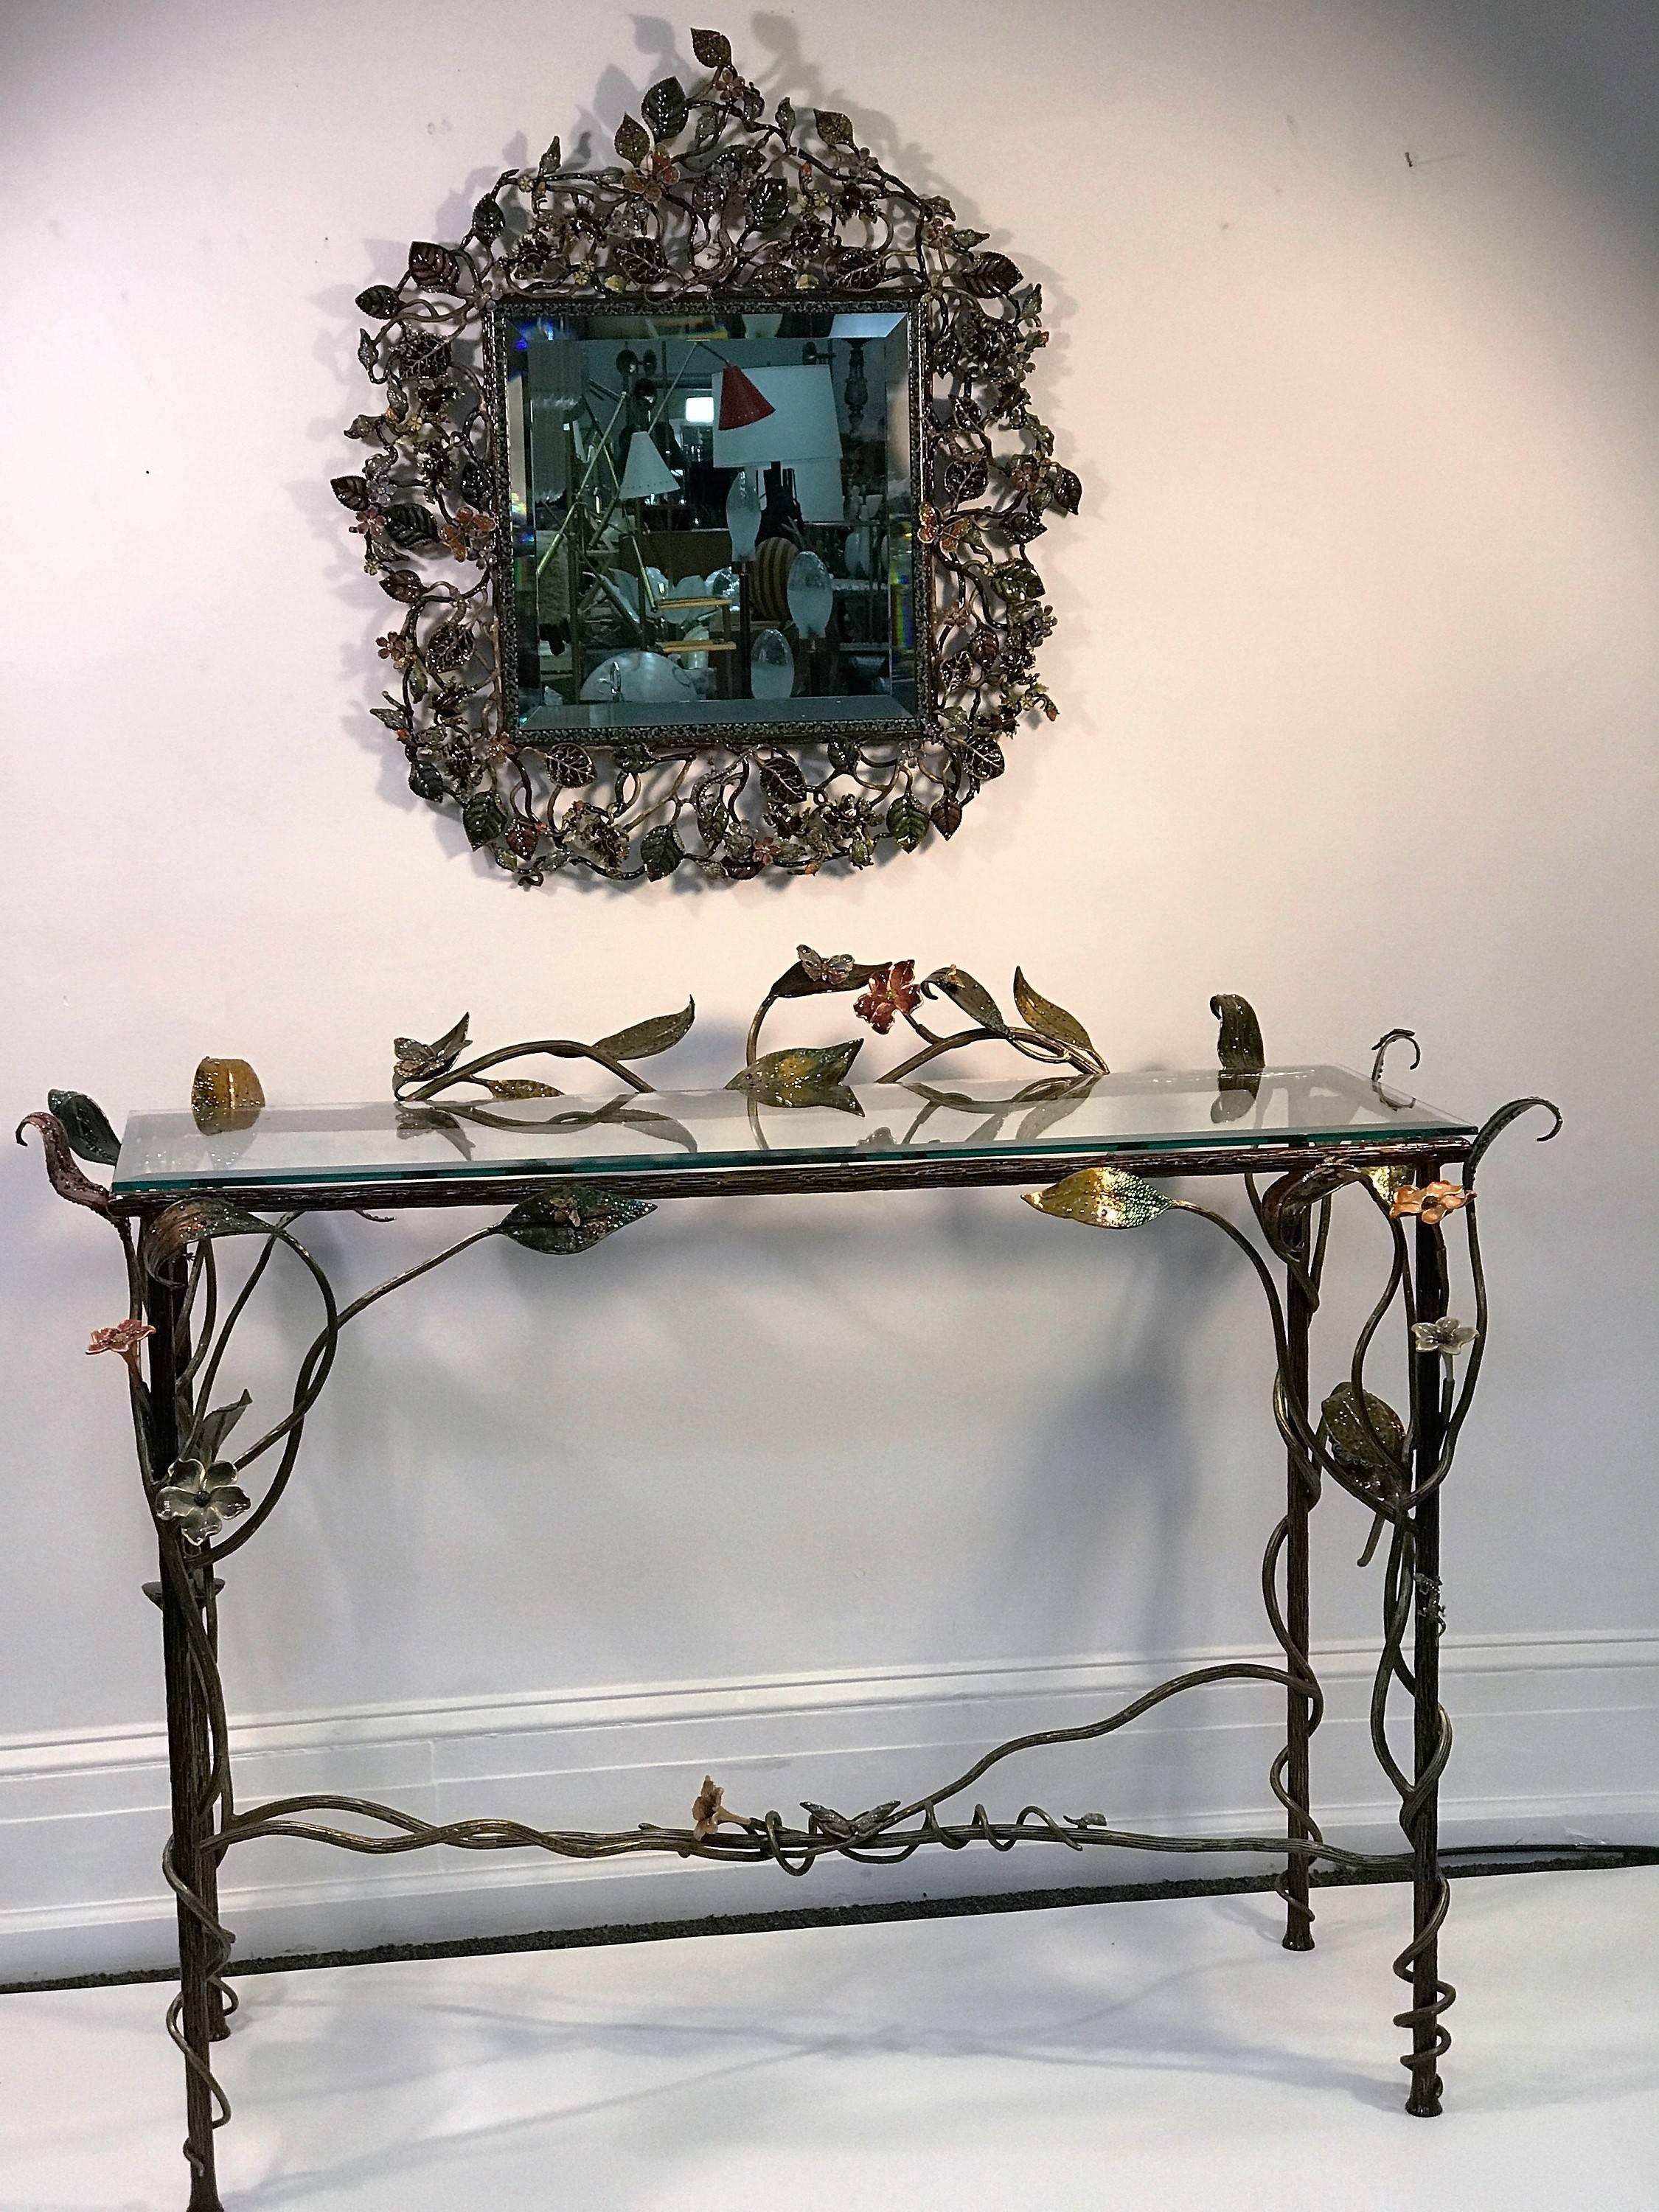 Beautiful and intricate multicolored poly chromed enamel on bronze jewel encrusted console teamed with matching wall mirror. Decorated with morning glories, wild flowers, butterflies, lizards, bees, salamanders, frogs, dragonflies and a snail. This